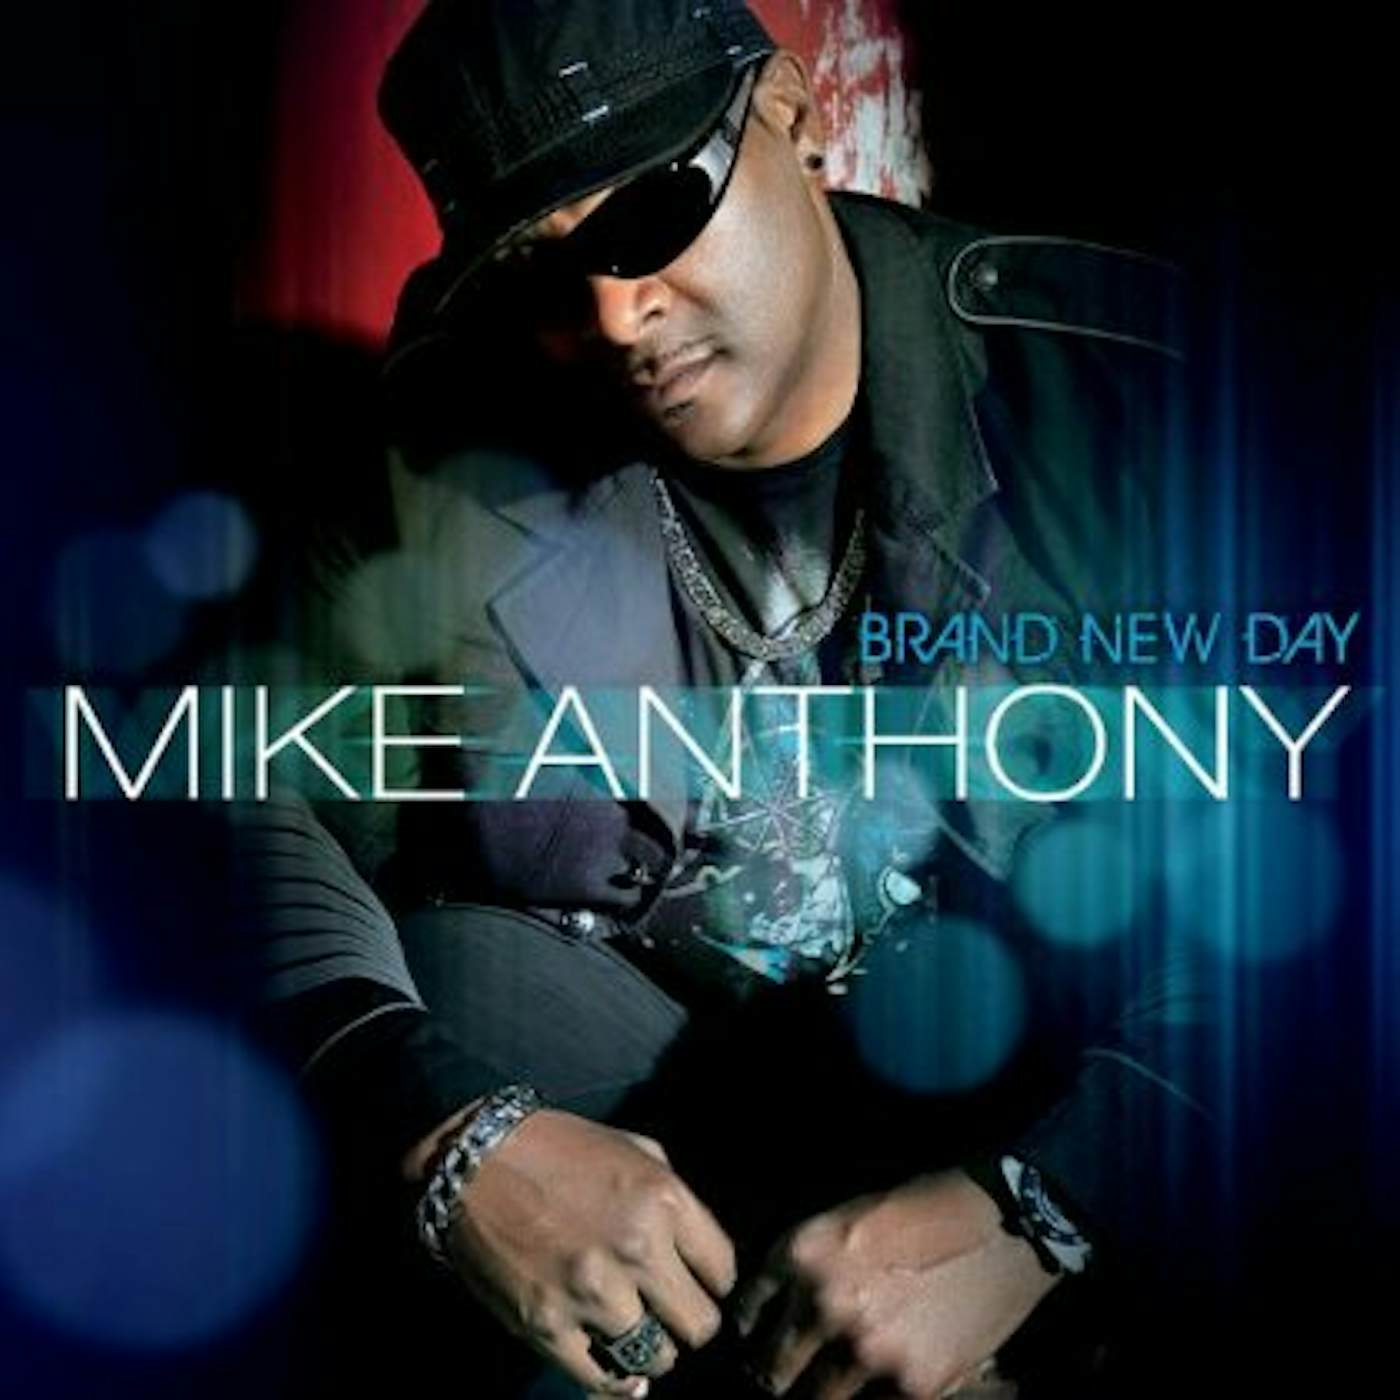 Mike Anthony BRAND NEW DAY CD